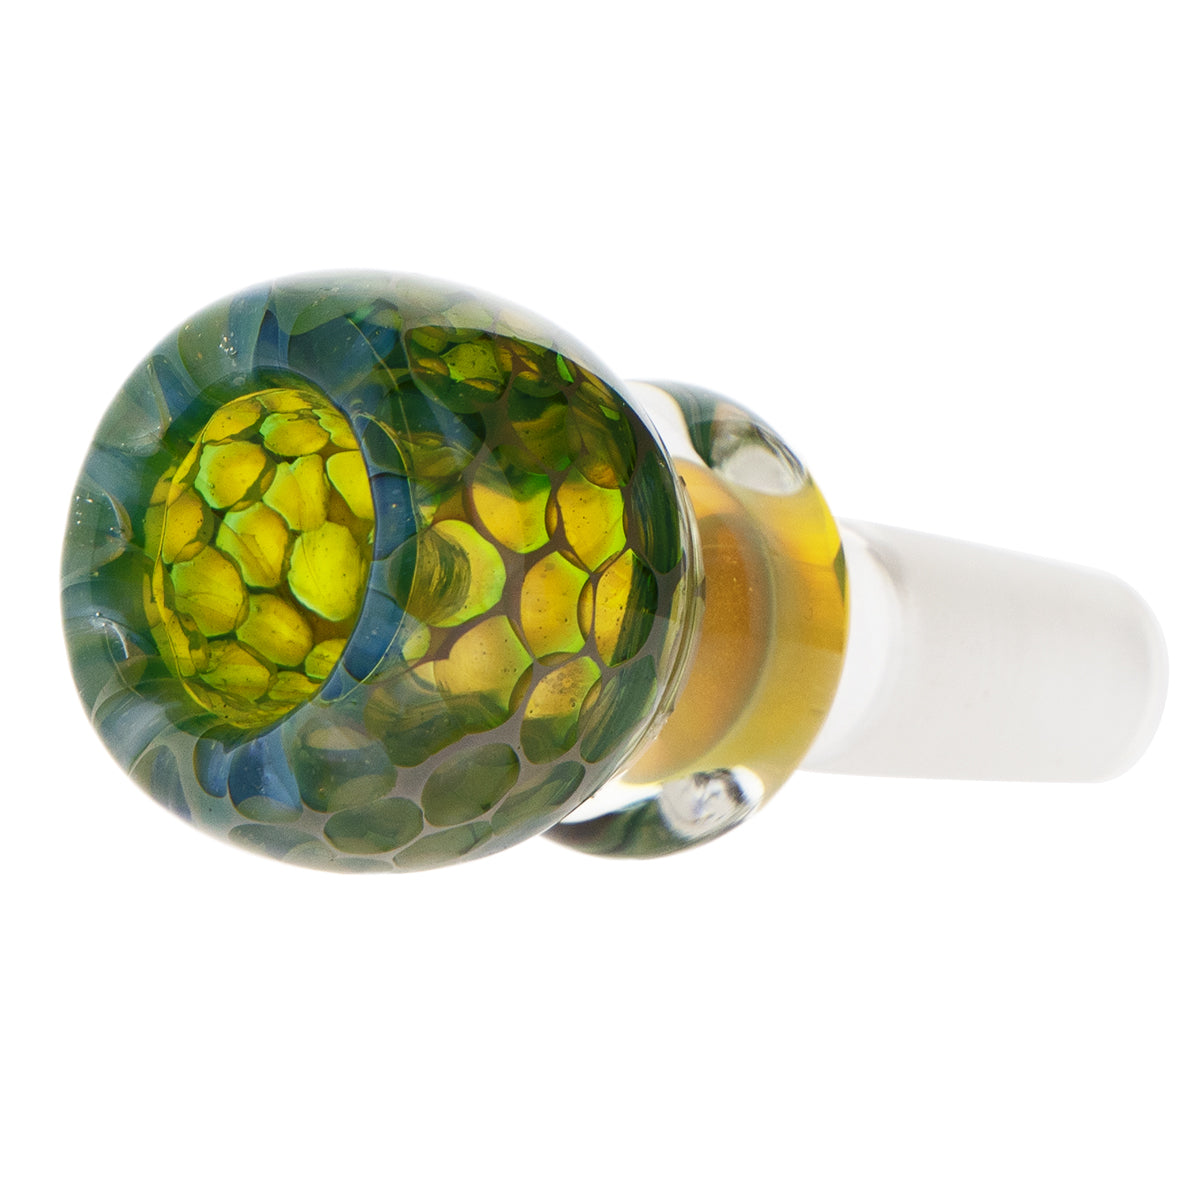 Bowl | Pastel Fumed Honeycomb Bowl | 14mm - Assorted Colors - 5 Count Glass Bowl Biohazard Inc   